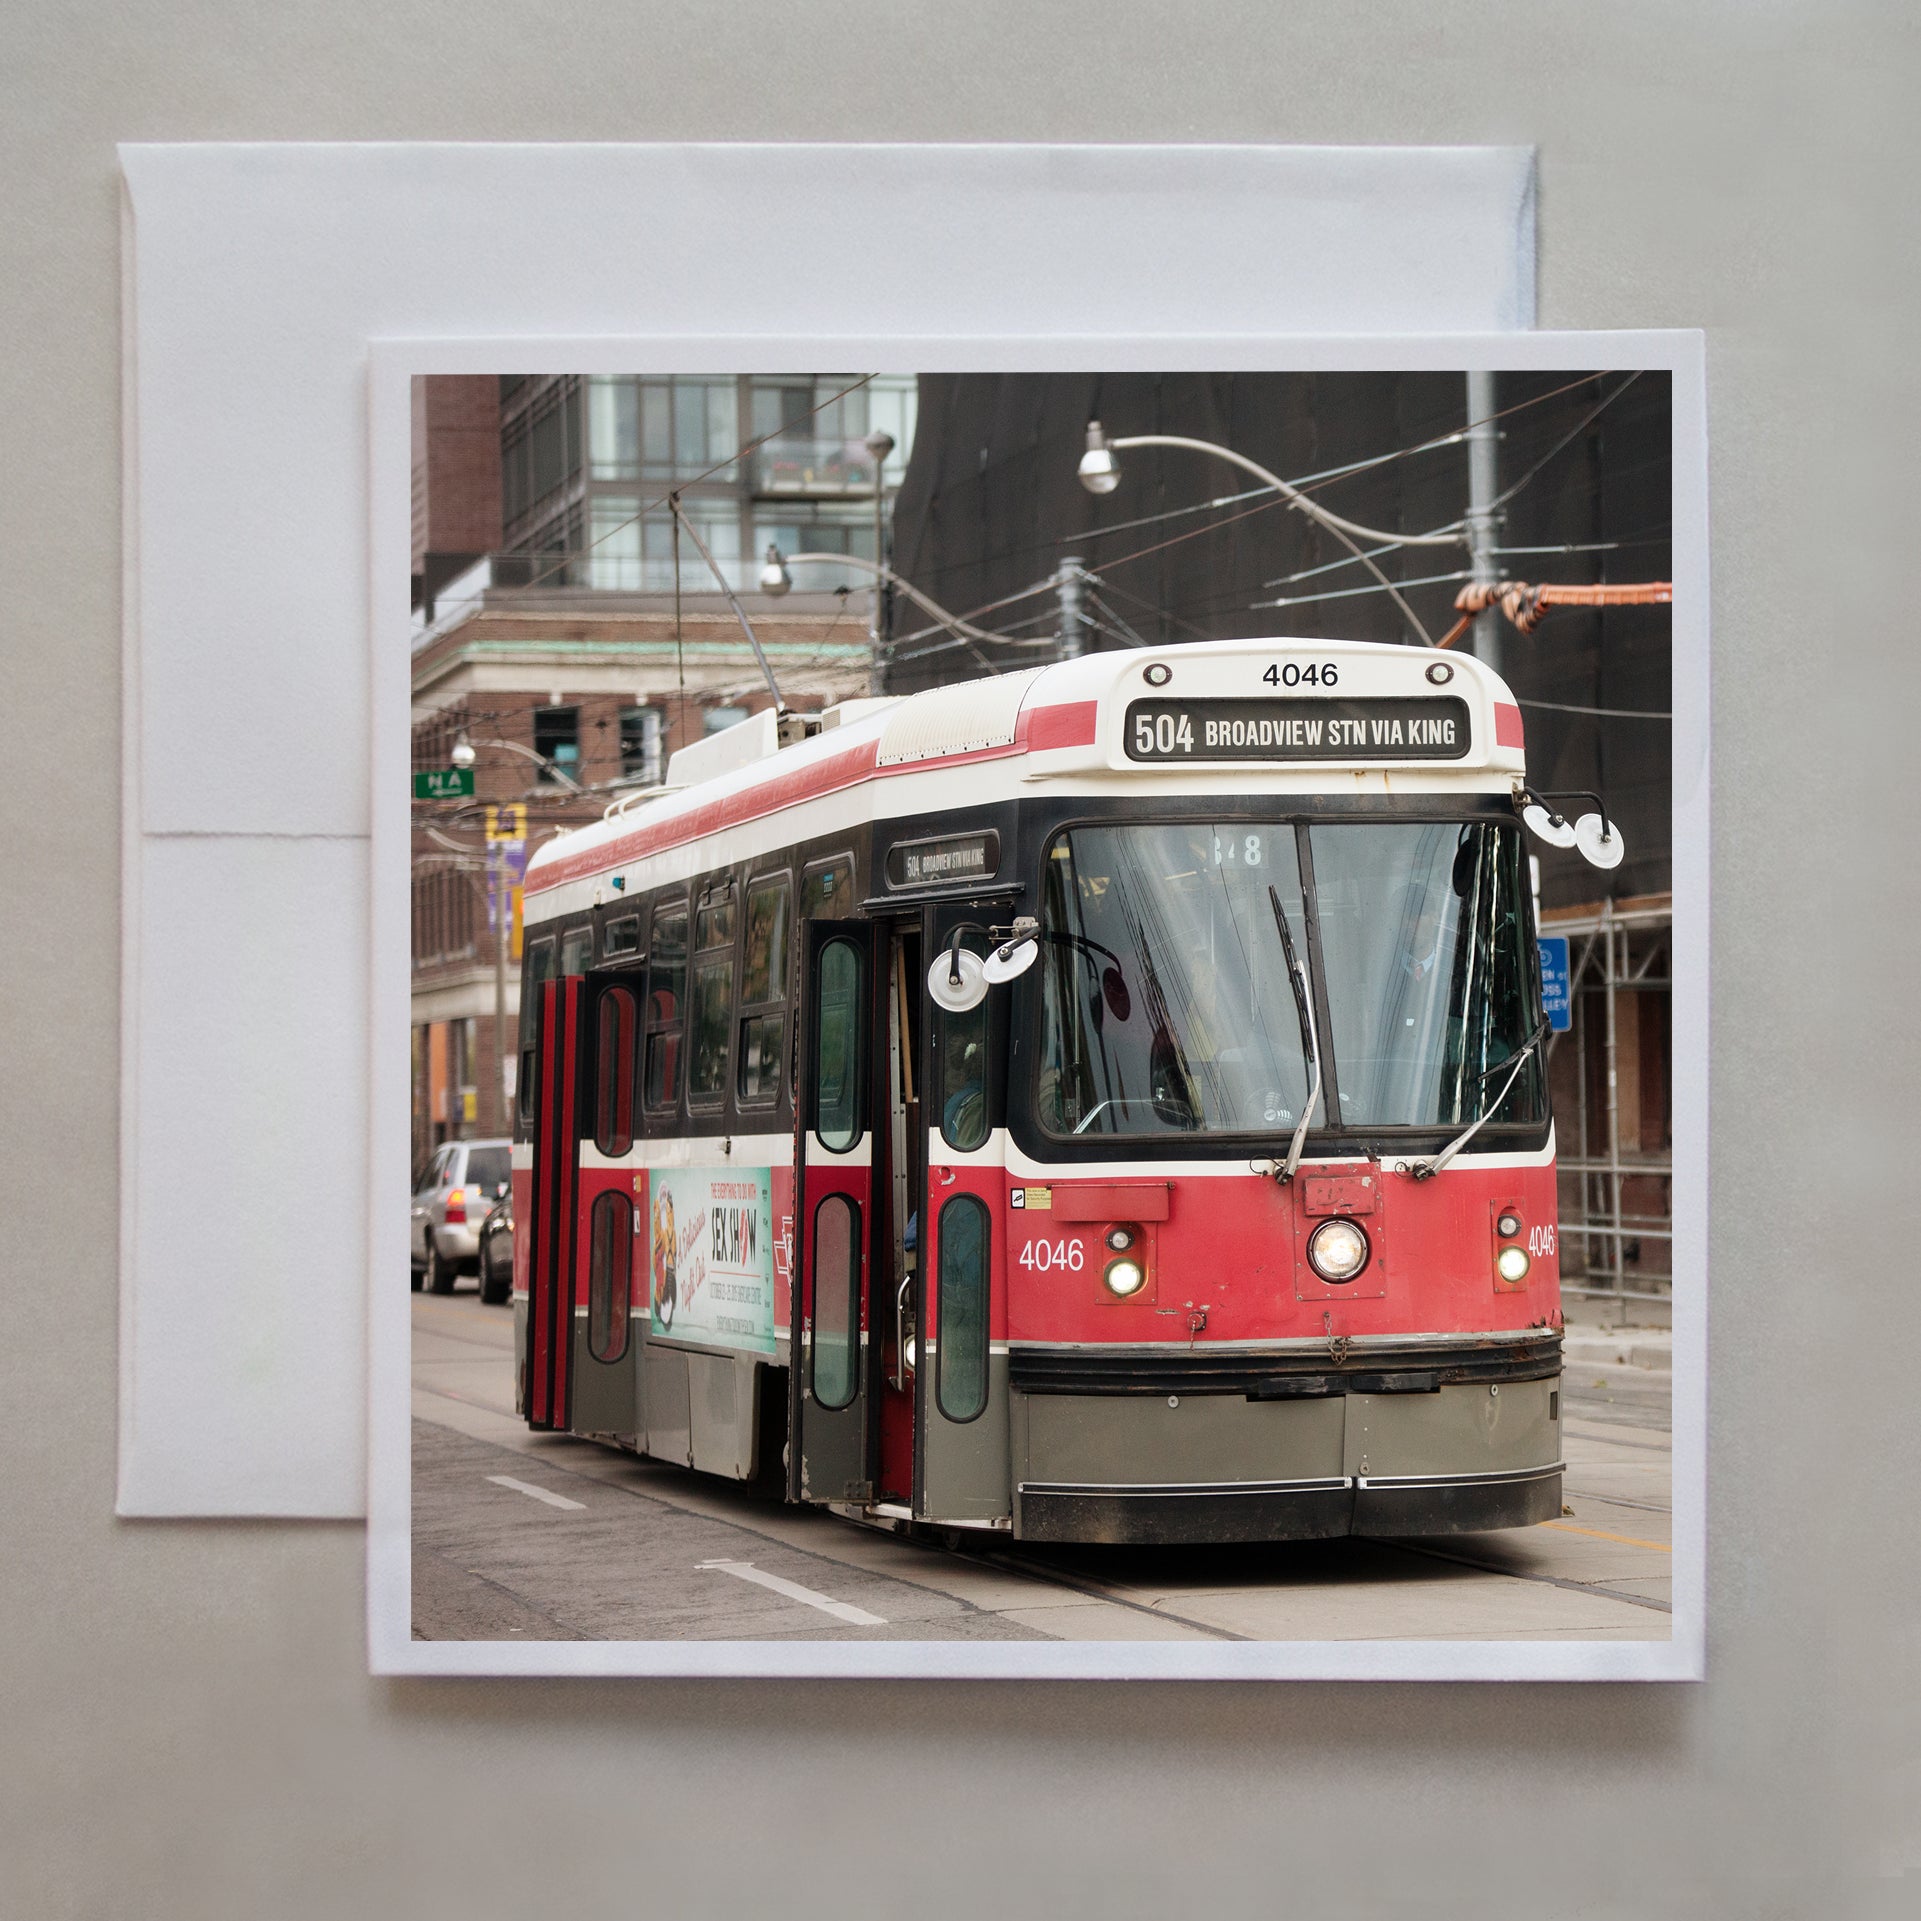 The old 504 Toronto streetcar is opening it's doors to passengers in this photo greeting card by photographer Caley Taylor.  